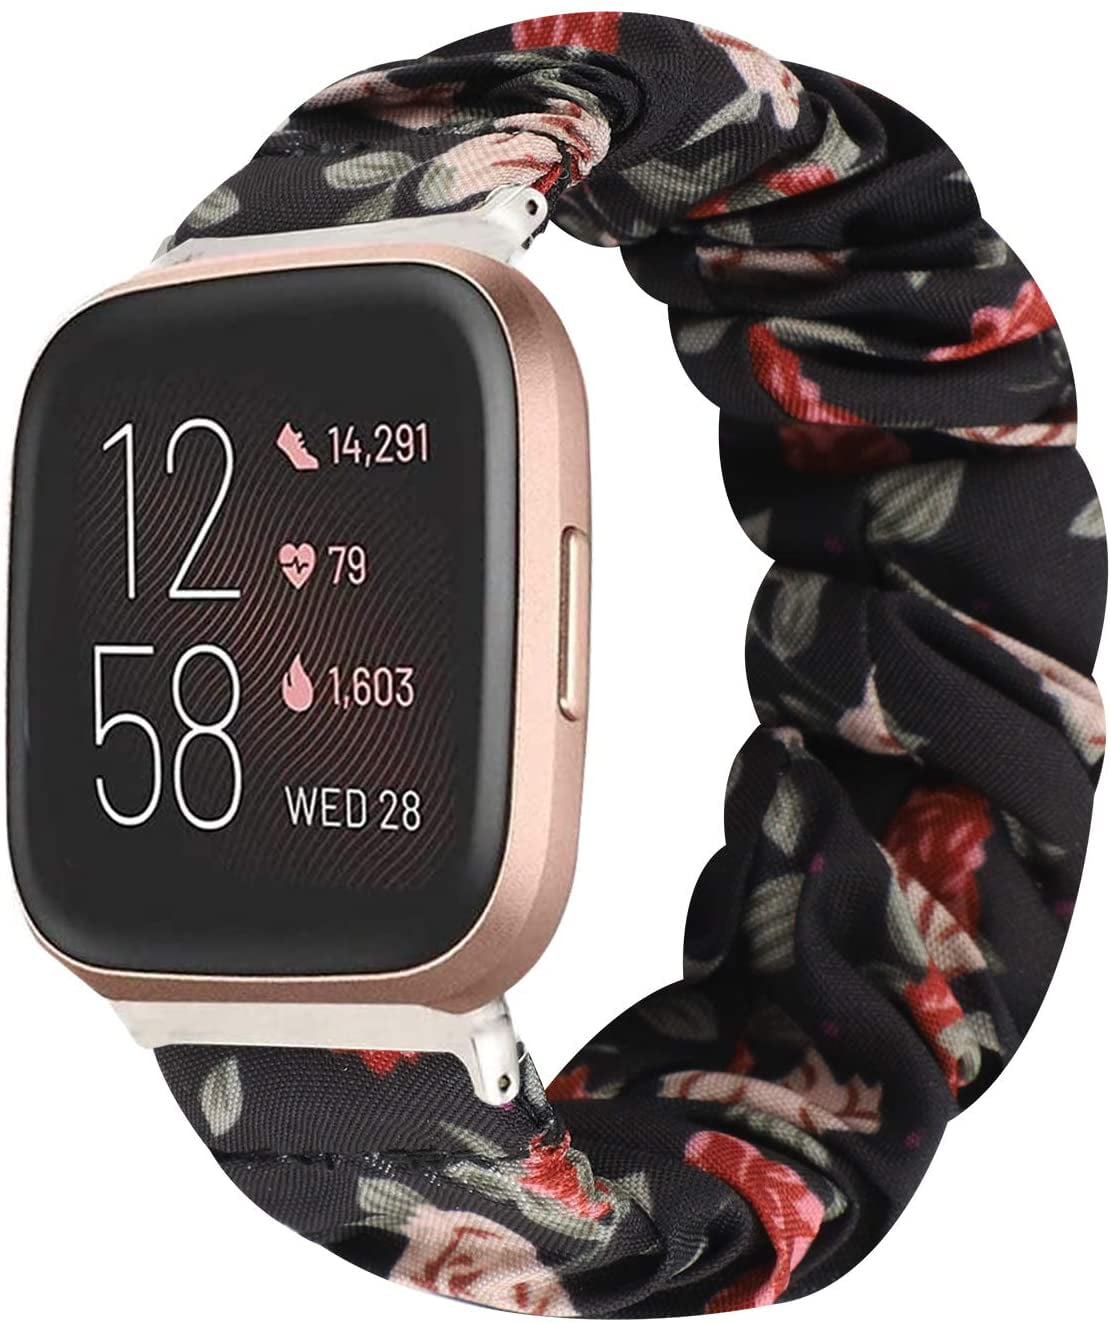 Compatible for Fitbit Versa 2 Bands, YOUkei Fabric Elastic Scrunchie ...